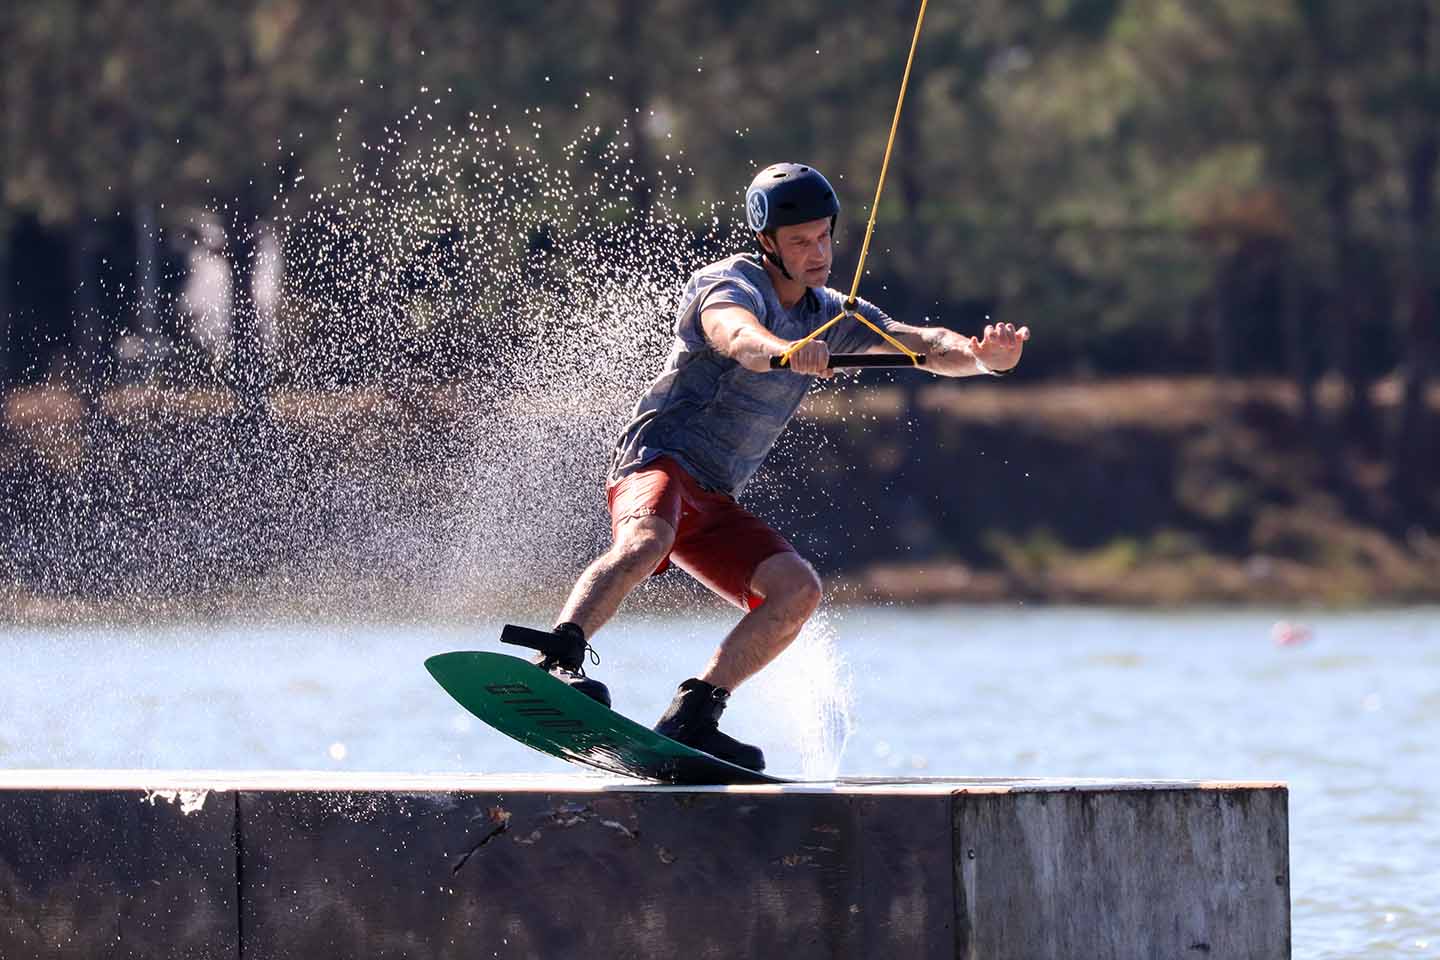 Session wakeboard photographe bordeaux clement philippon